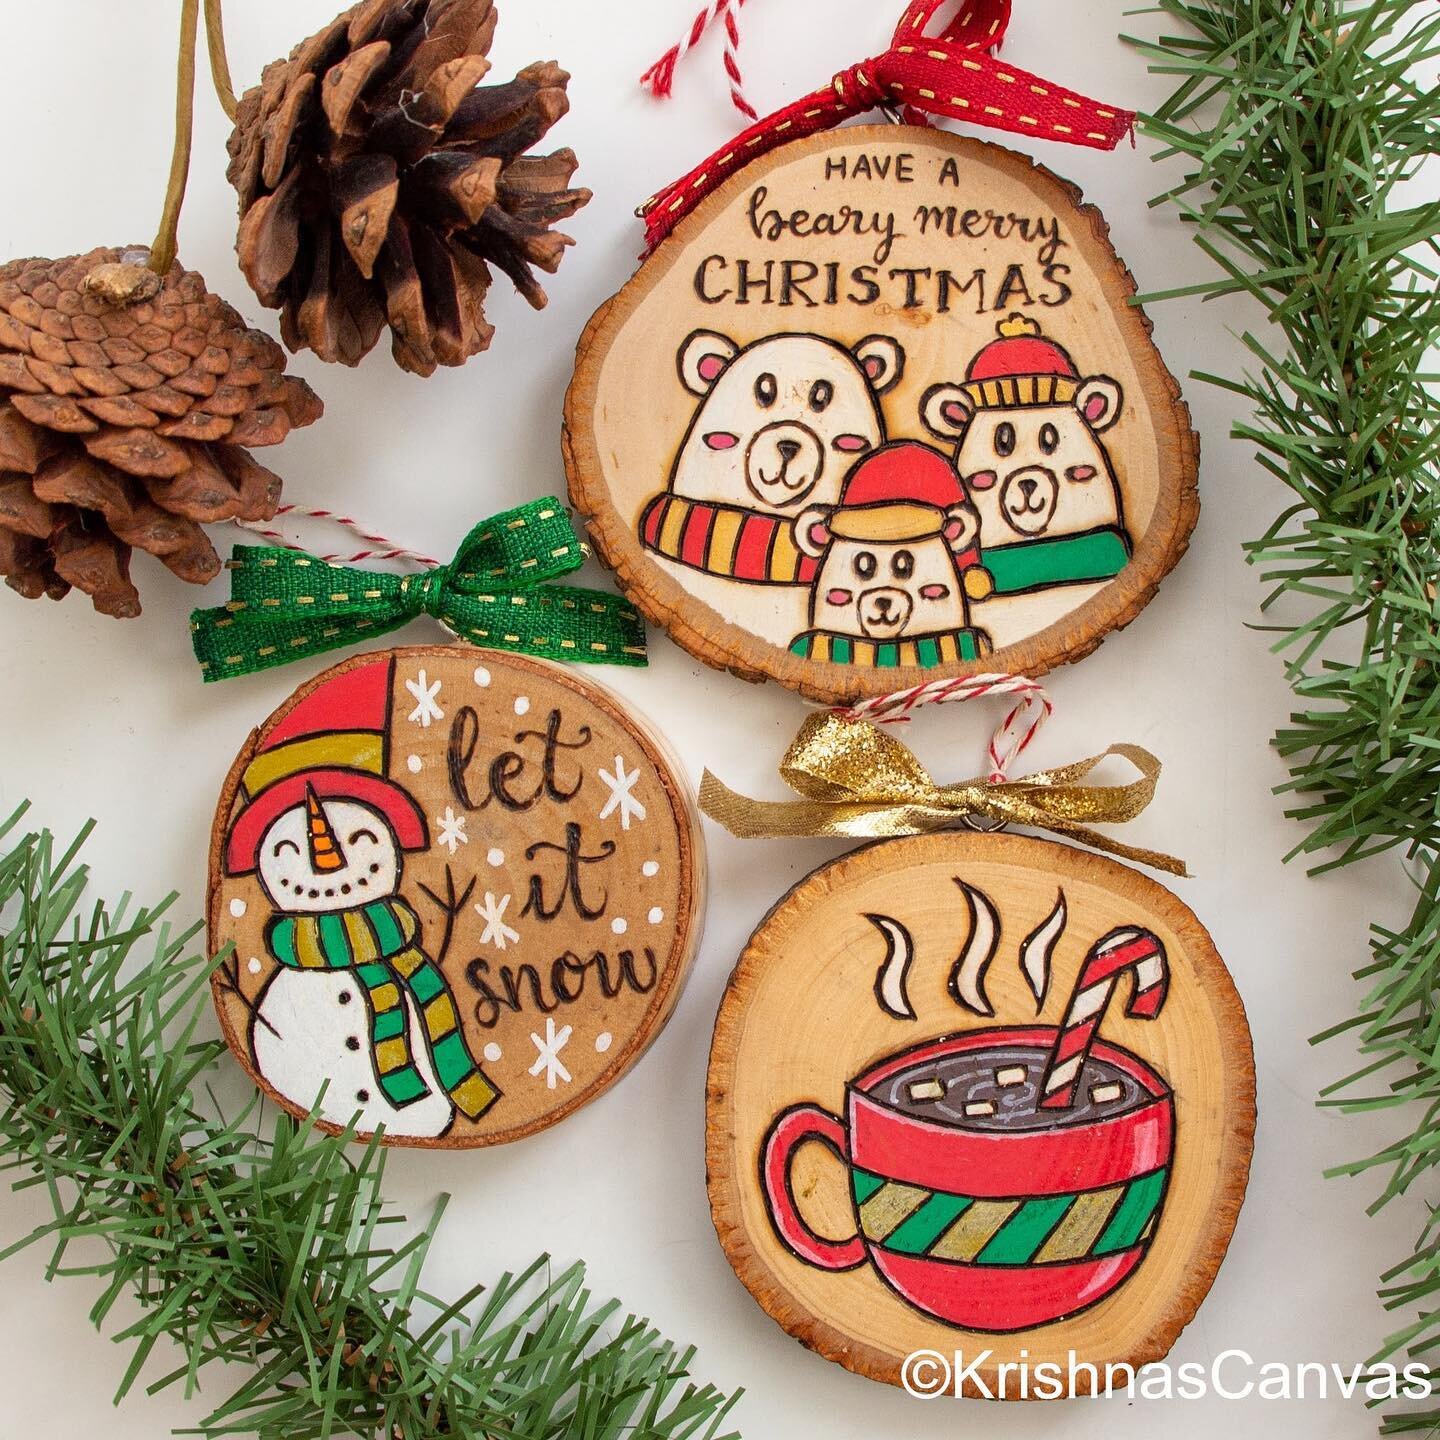 #bccraftfair2022 Day 1: Ornaments Sale! 

All ornaments are 20% off for the duration of the Burn Club Craft Fair!

Price: $16 each
Size: 2-4 inches

Description: All ornaments are woodburned and/or painted on natural basswood or birch slices with liv